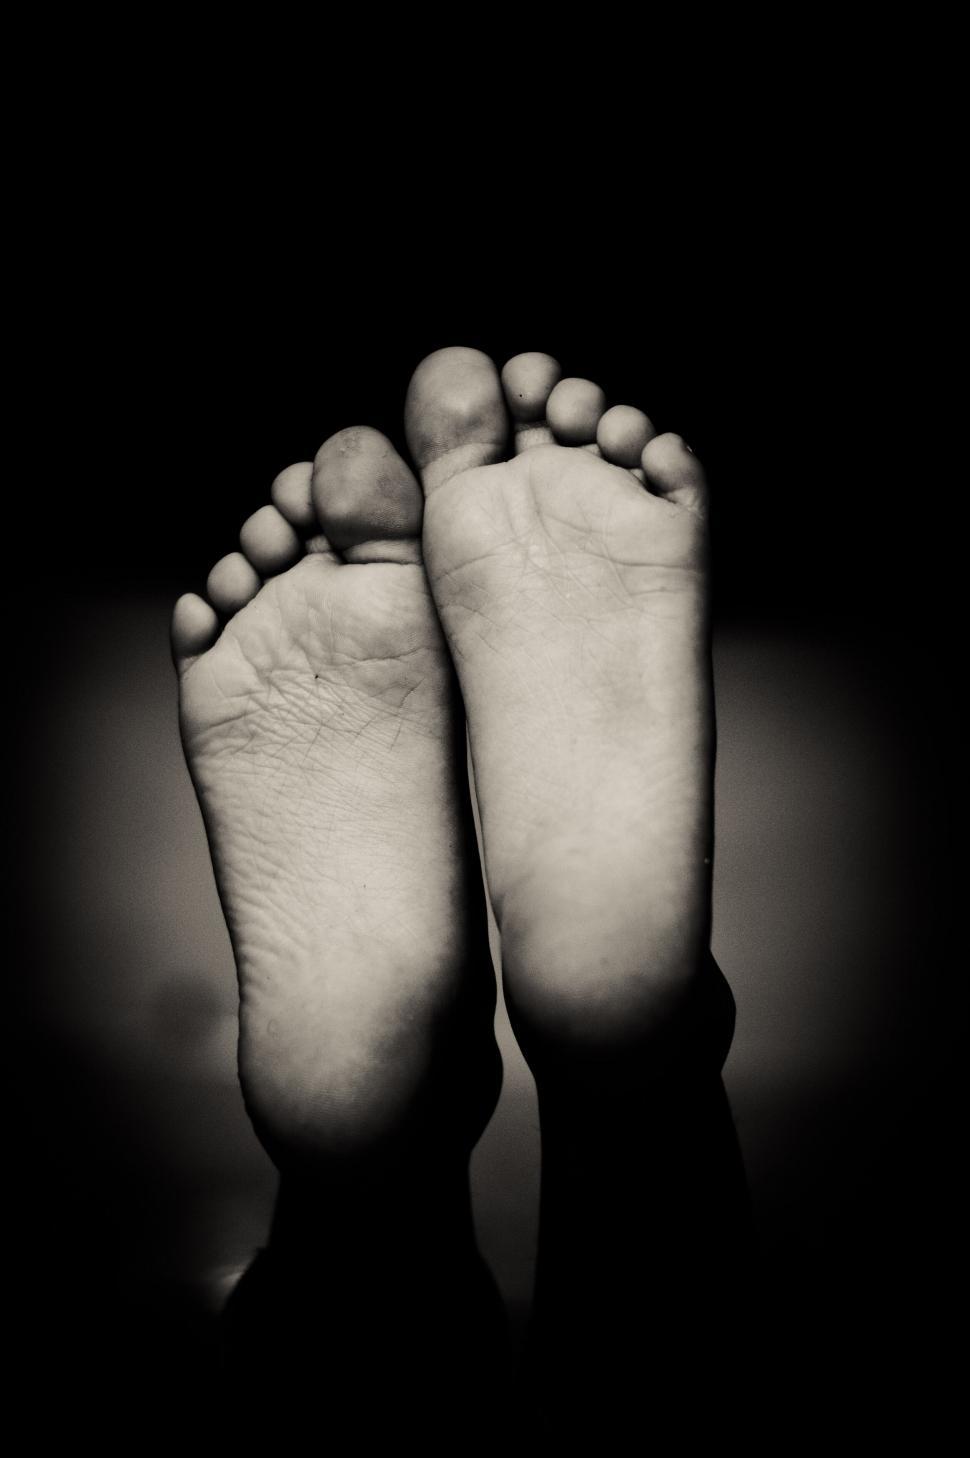 Free Image of Sole of bare human feet in black and white 